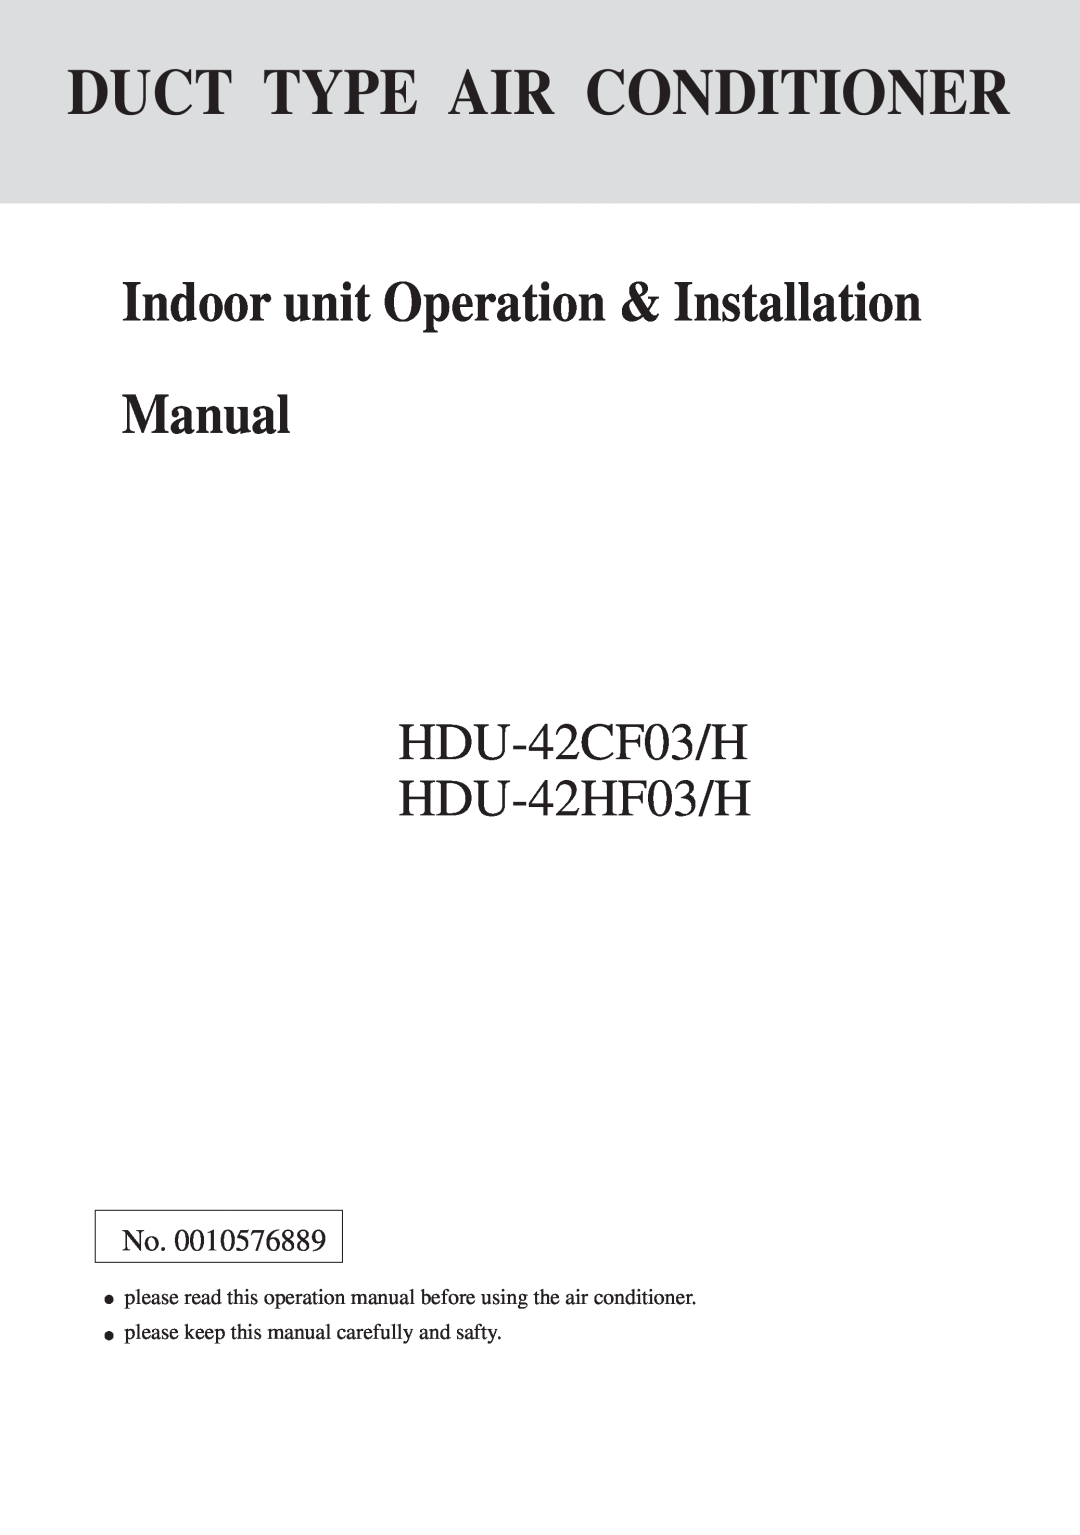 Haier HDU-42CF03/H installation manual Duct Type Air Conditioner, Indoor unit Operation & Installation Manual 